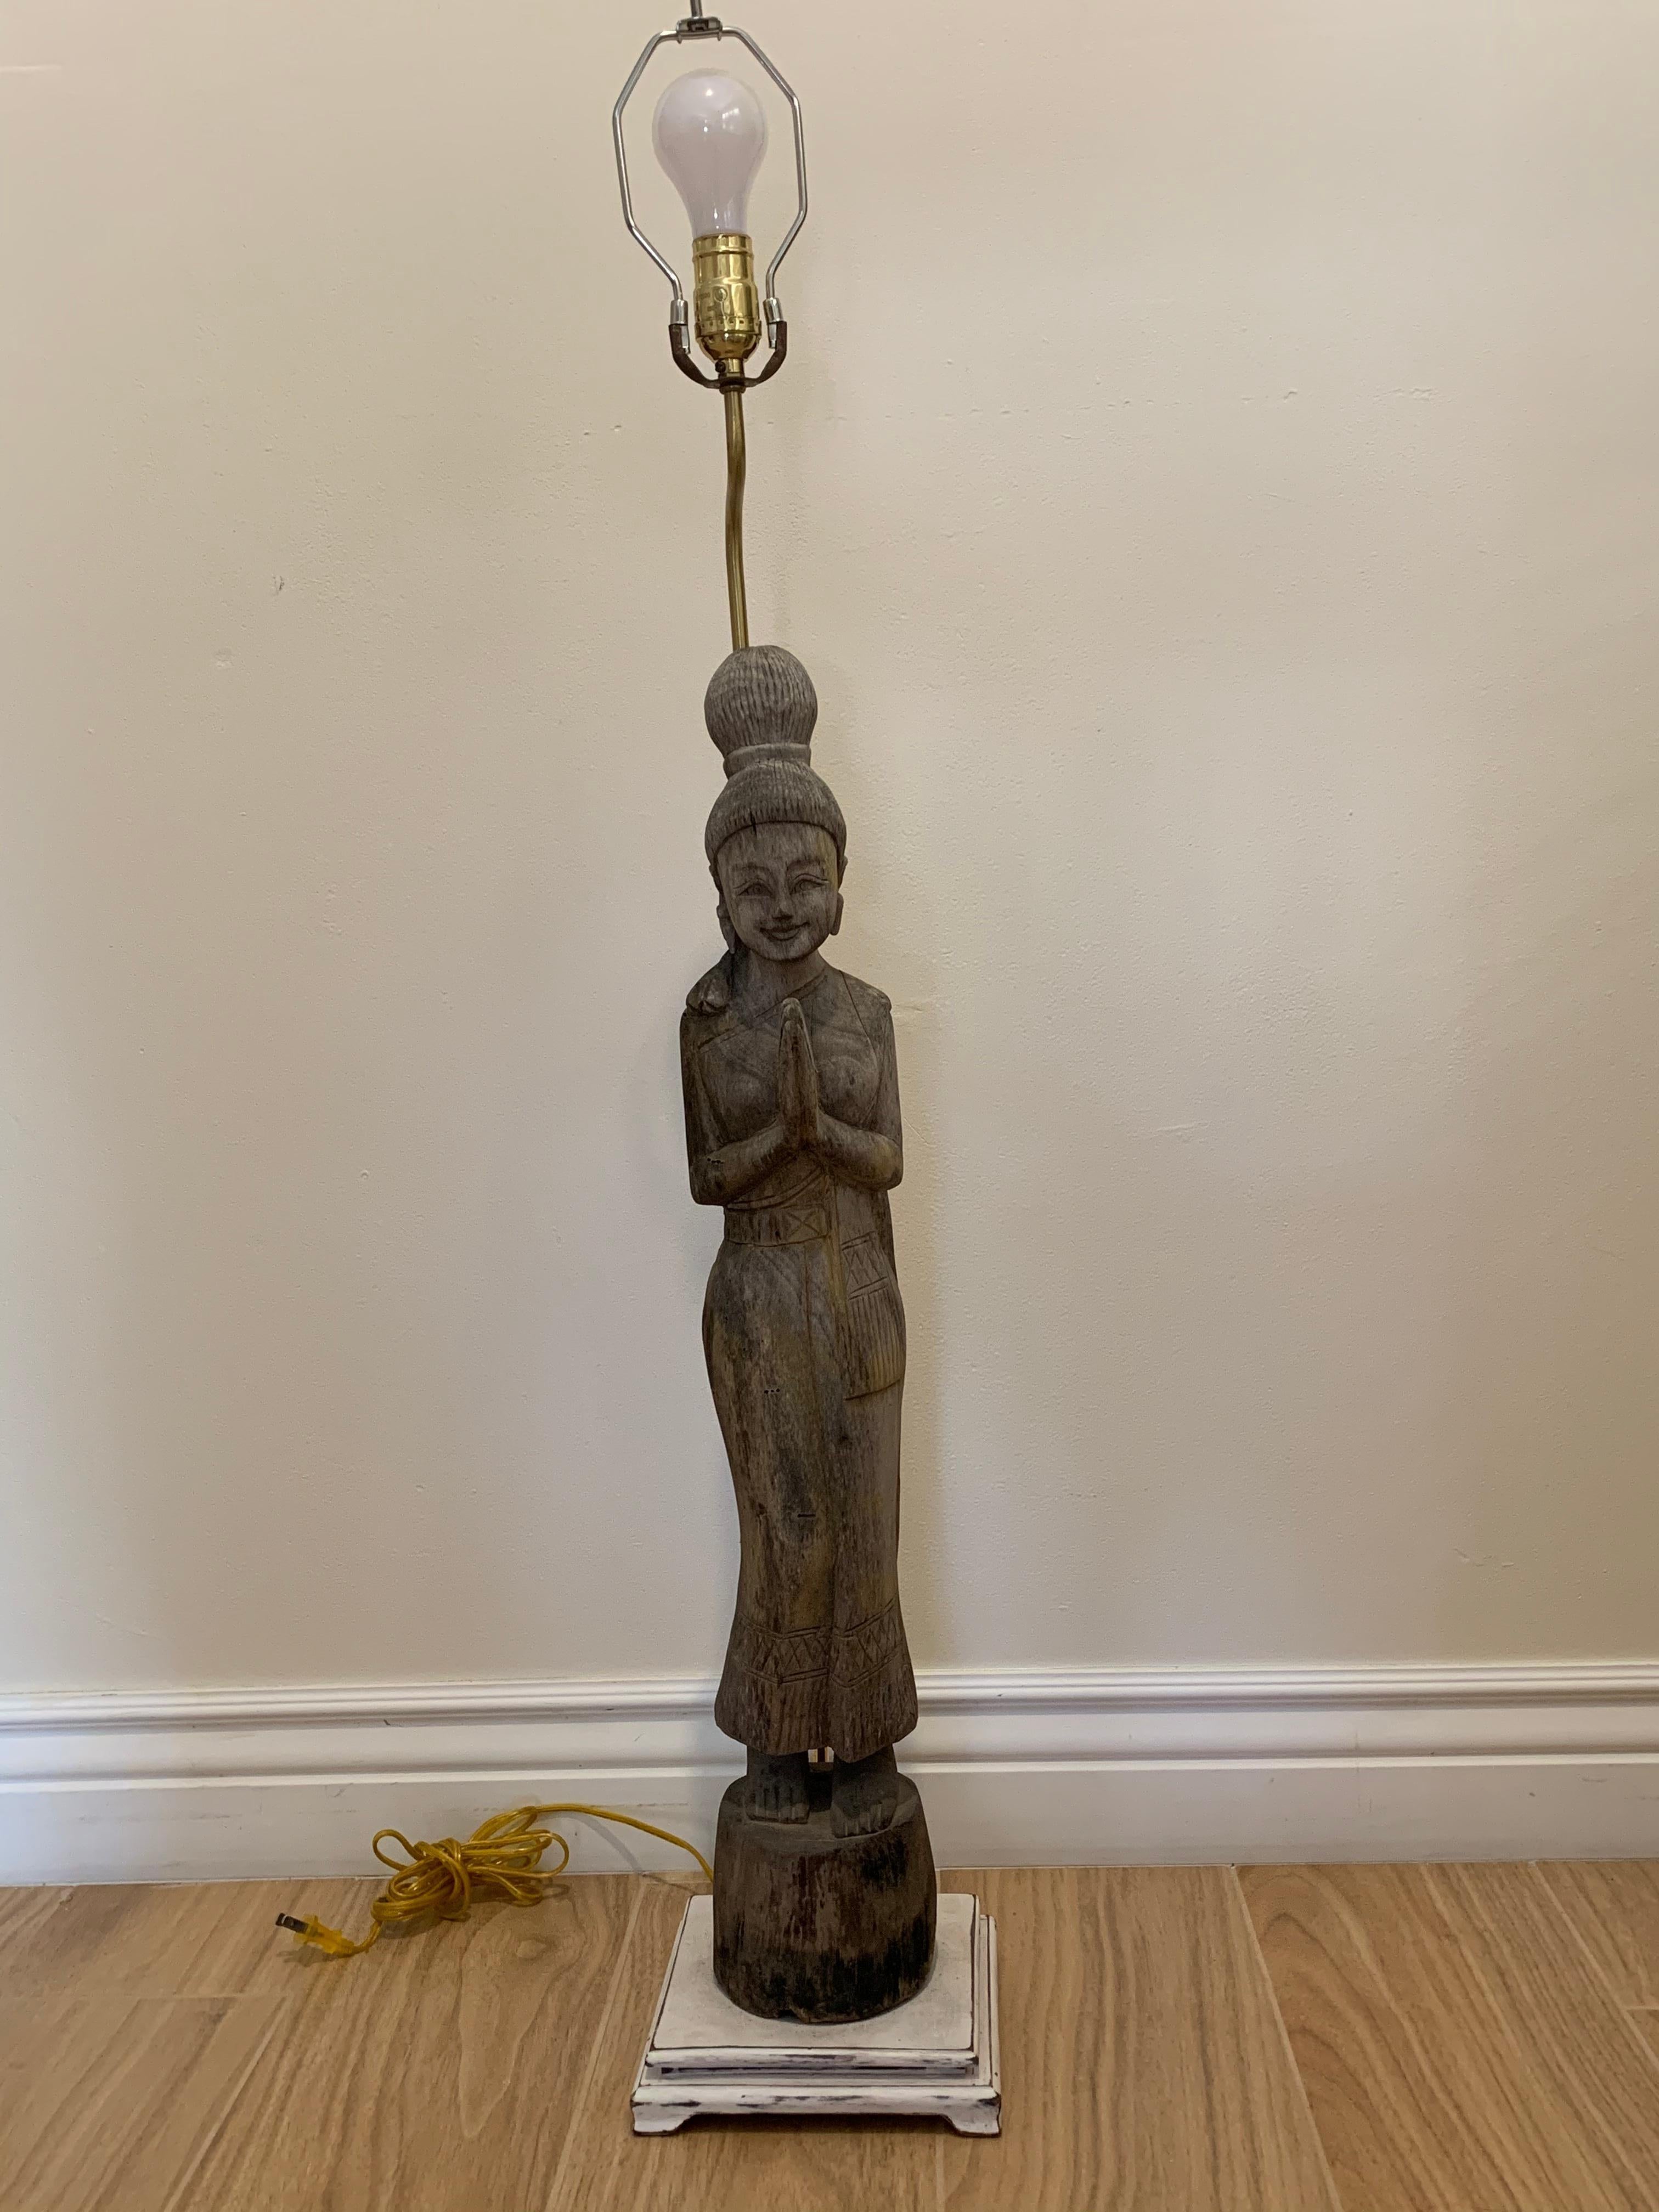 One of a kind, large hand carved wooden Buddha lamp for interior decor. Beautiful intricate details in wood carving. Could if you like to remove the electrical connection and use it as decorative wood sculpture. Perfect for living room, bedroom or